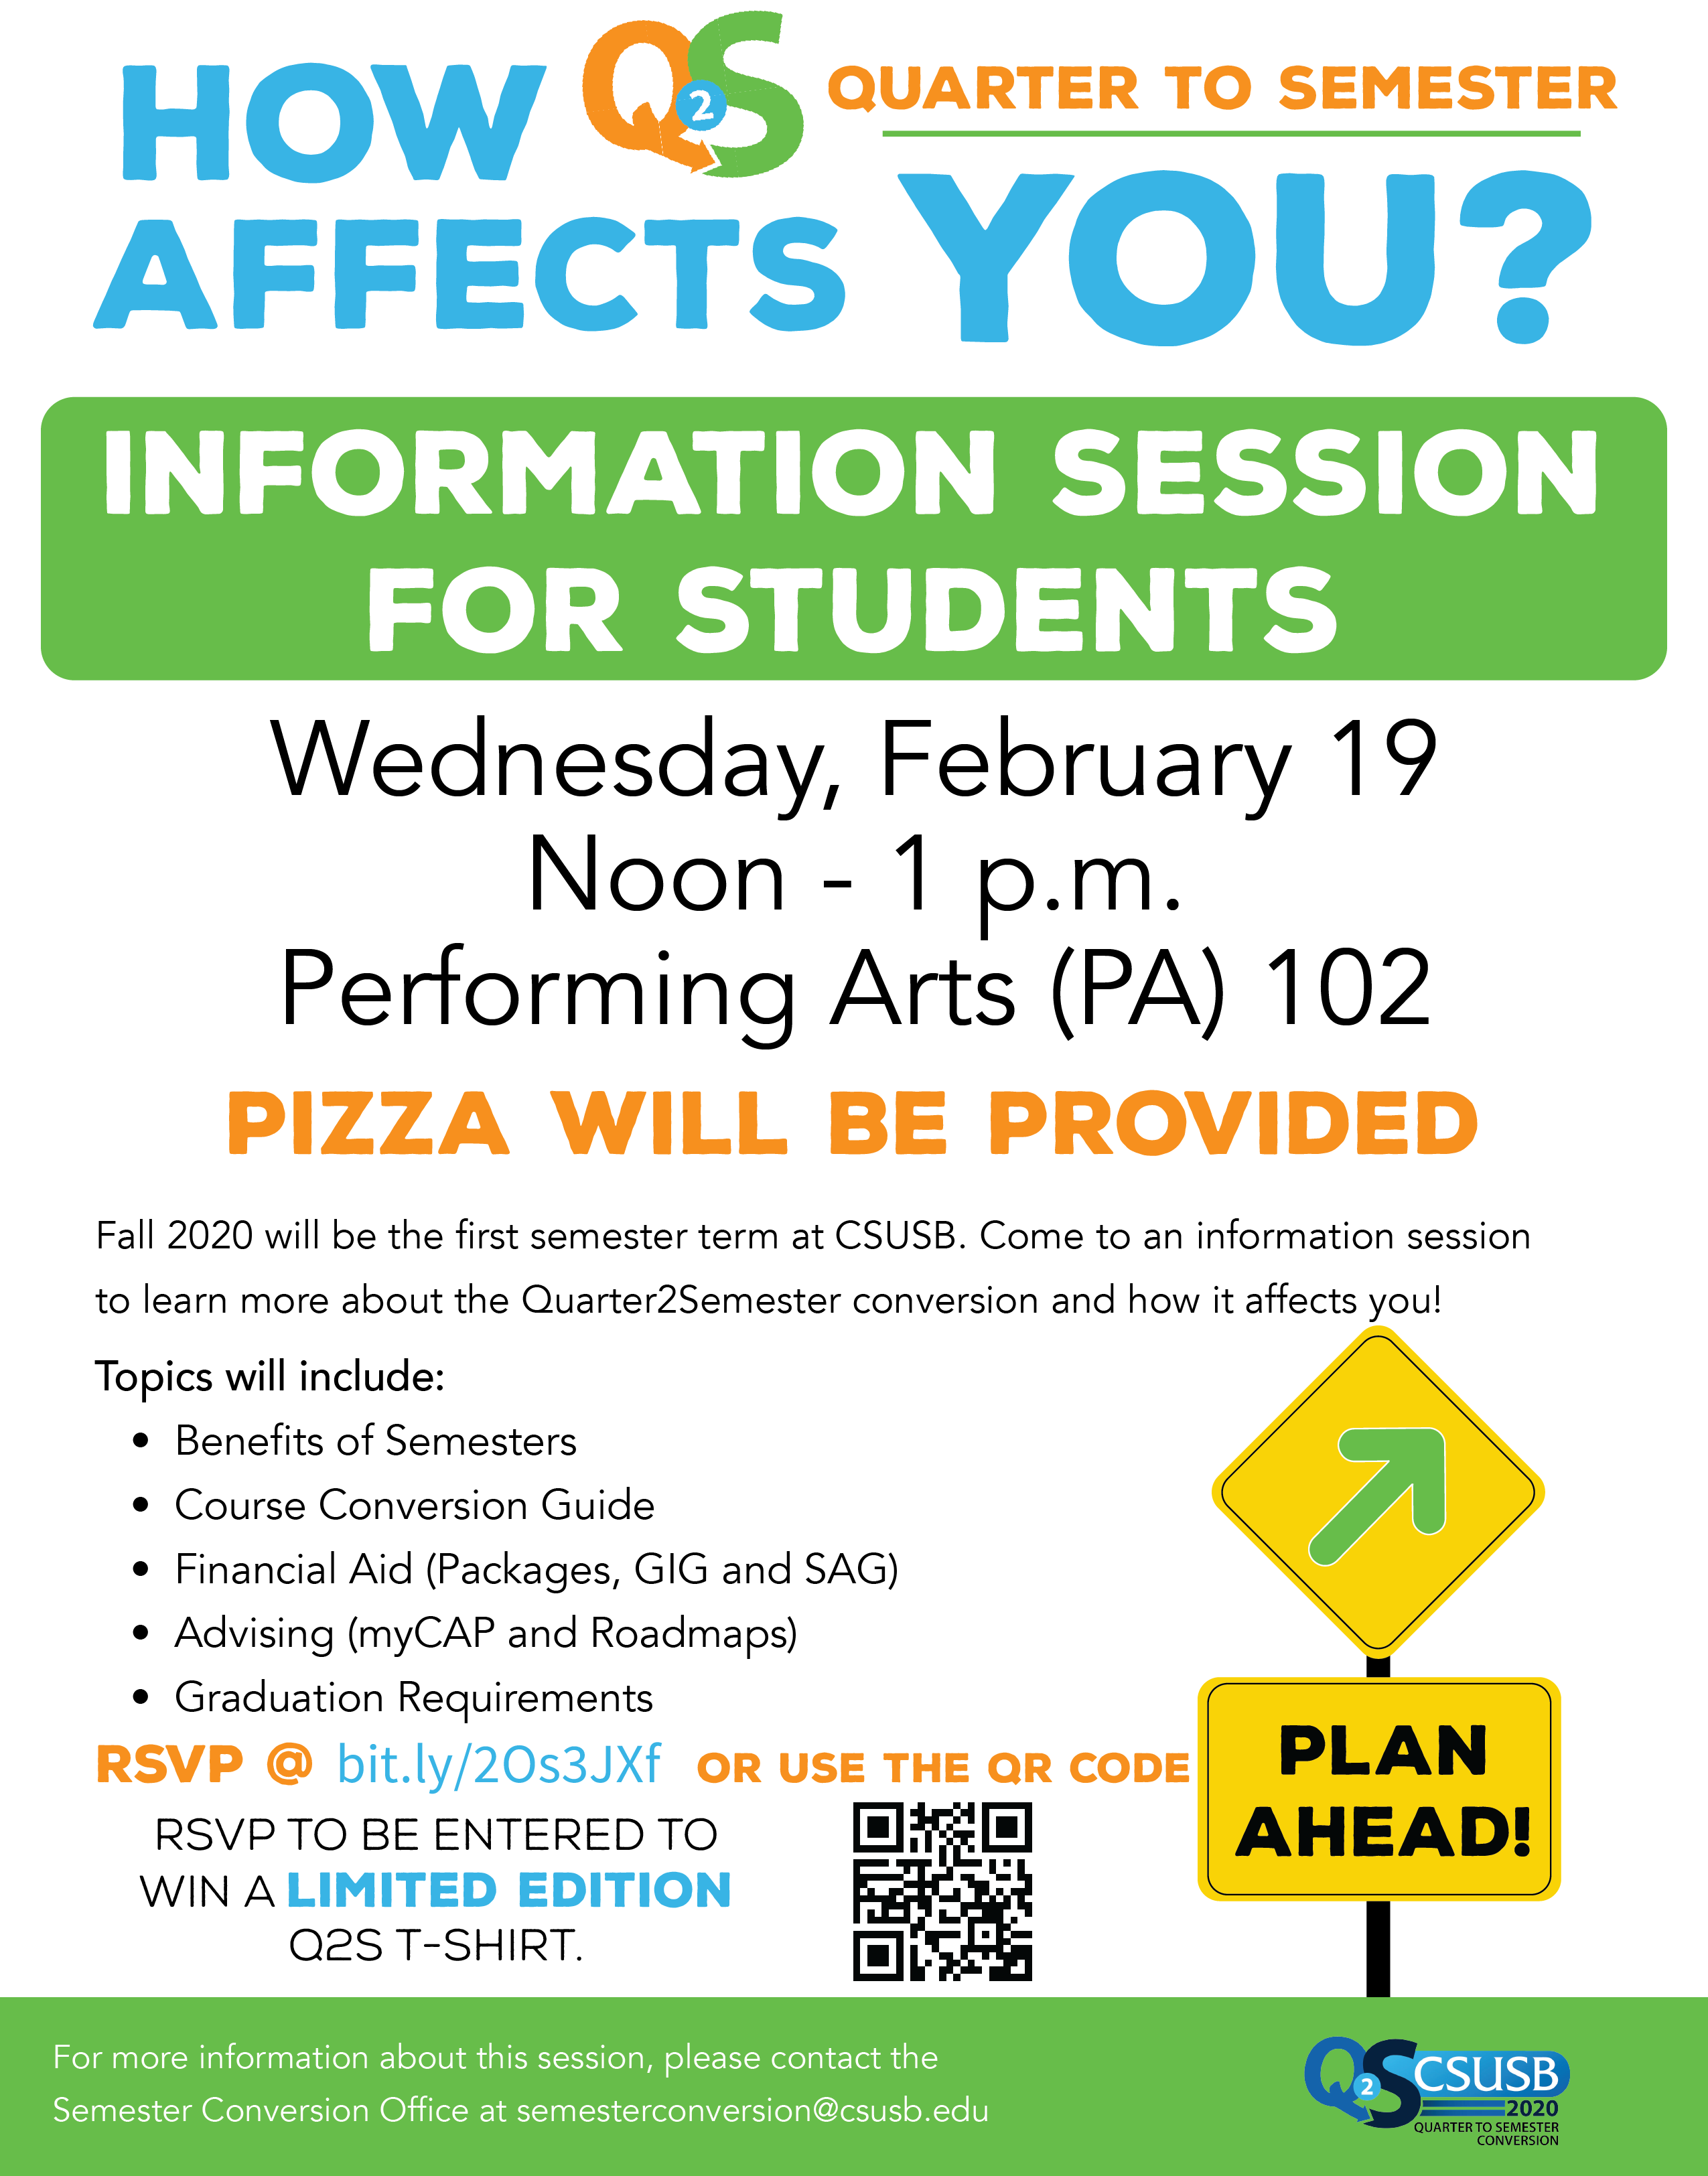 See how Q2S affets you at the student information session, Wednesday, February 19, 2020 at 12pm in PA-102. RSVP at https://bit.ly/2Os3JXf